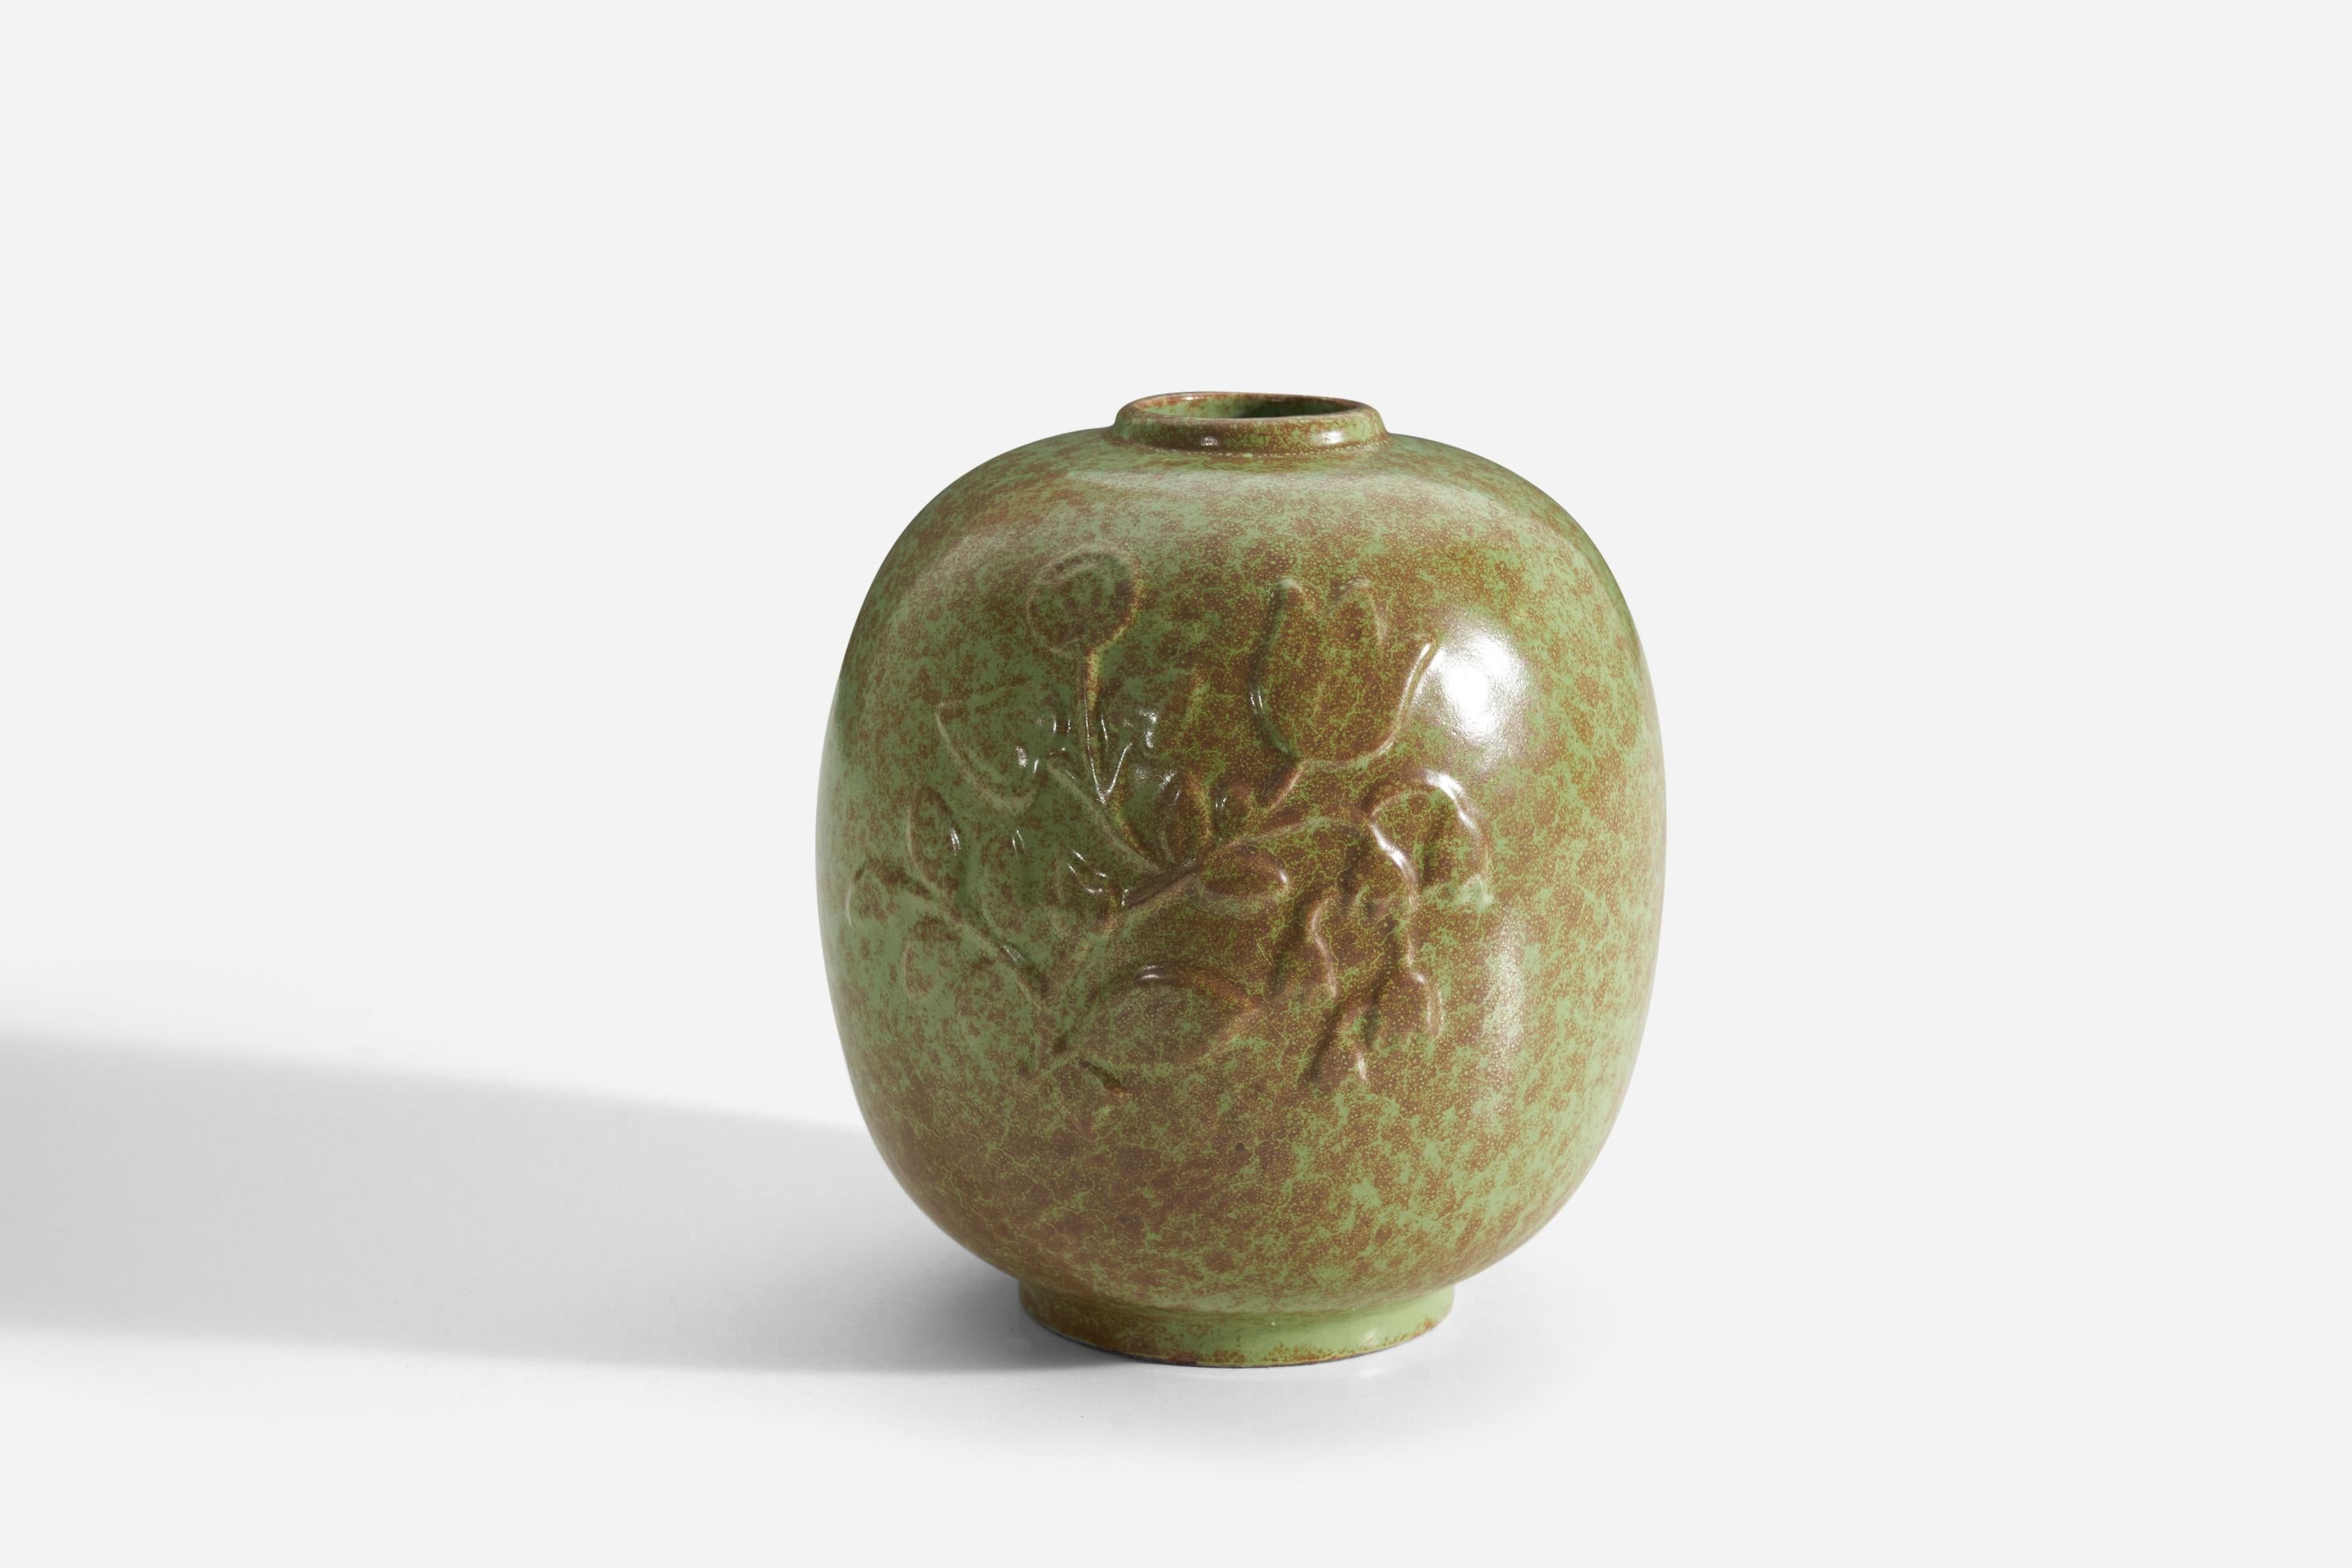 A green and brown-glazed earthenware vase designed and produced by Nittsjö, Sweden, c. 1930s-1940s.